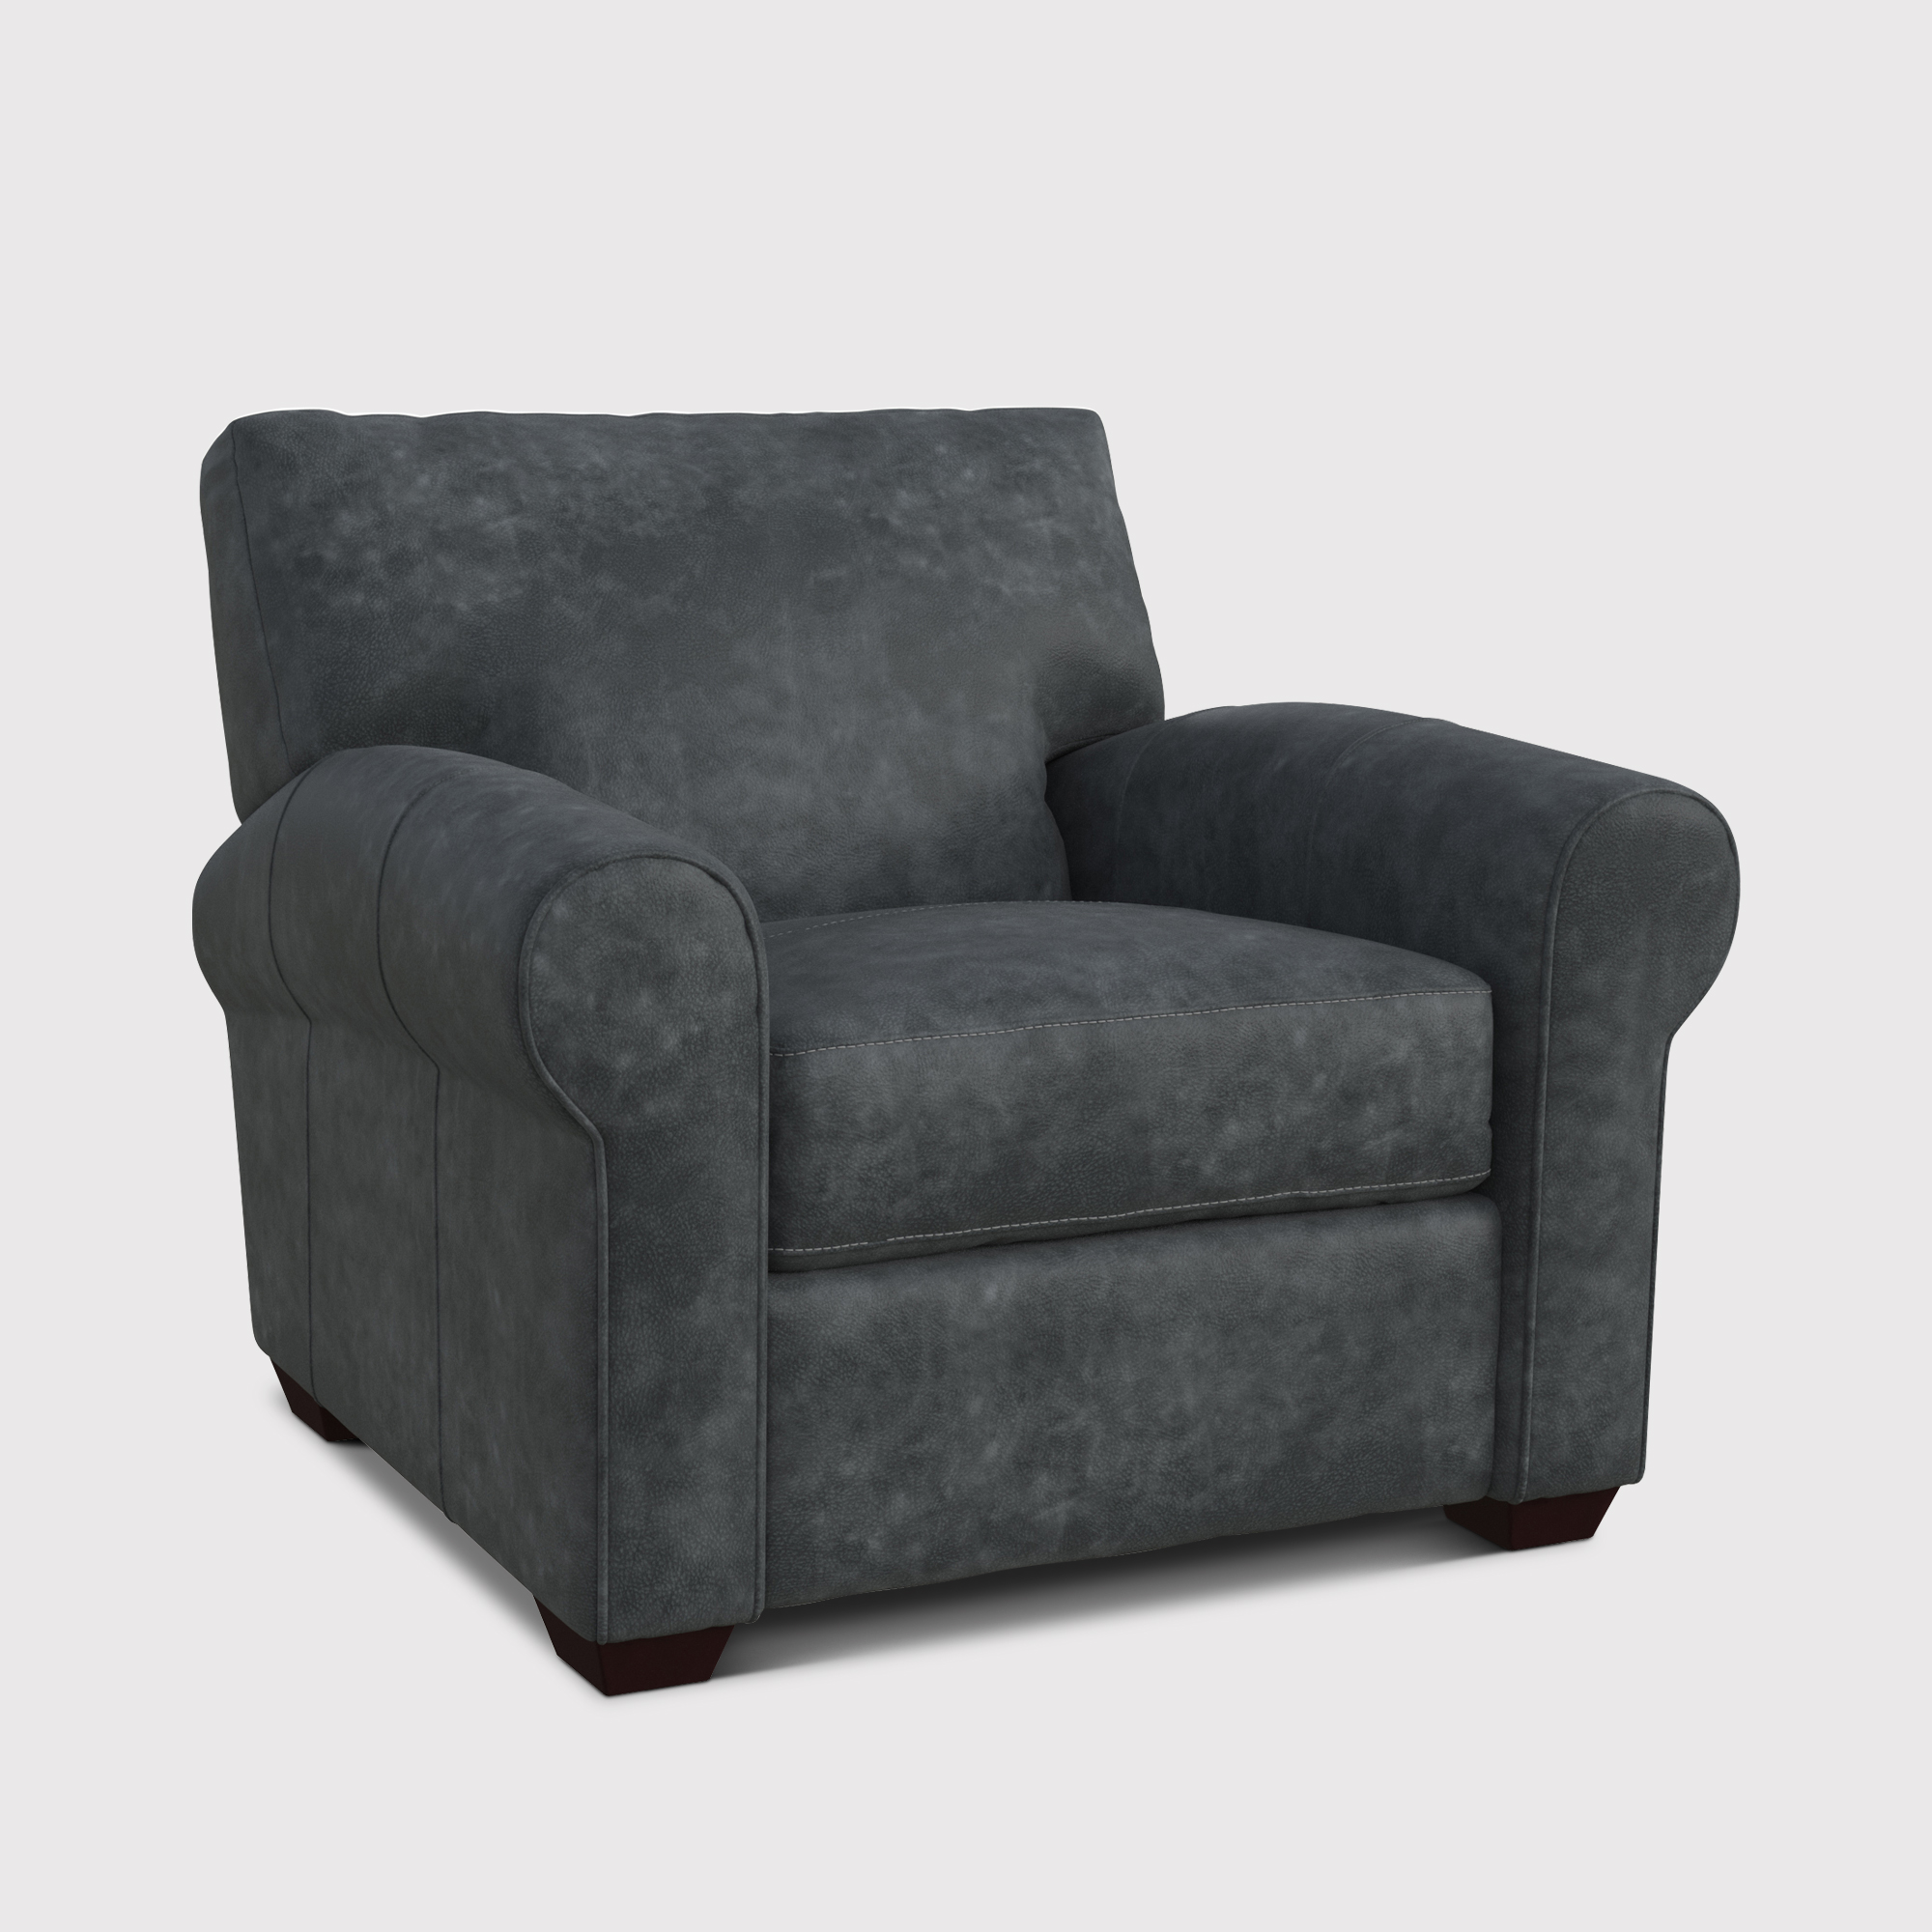 Houston Pushback Recliner Chair, Grey Leather | Barker & Stonehouse